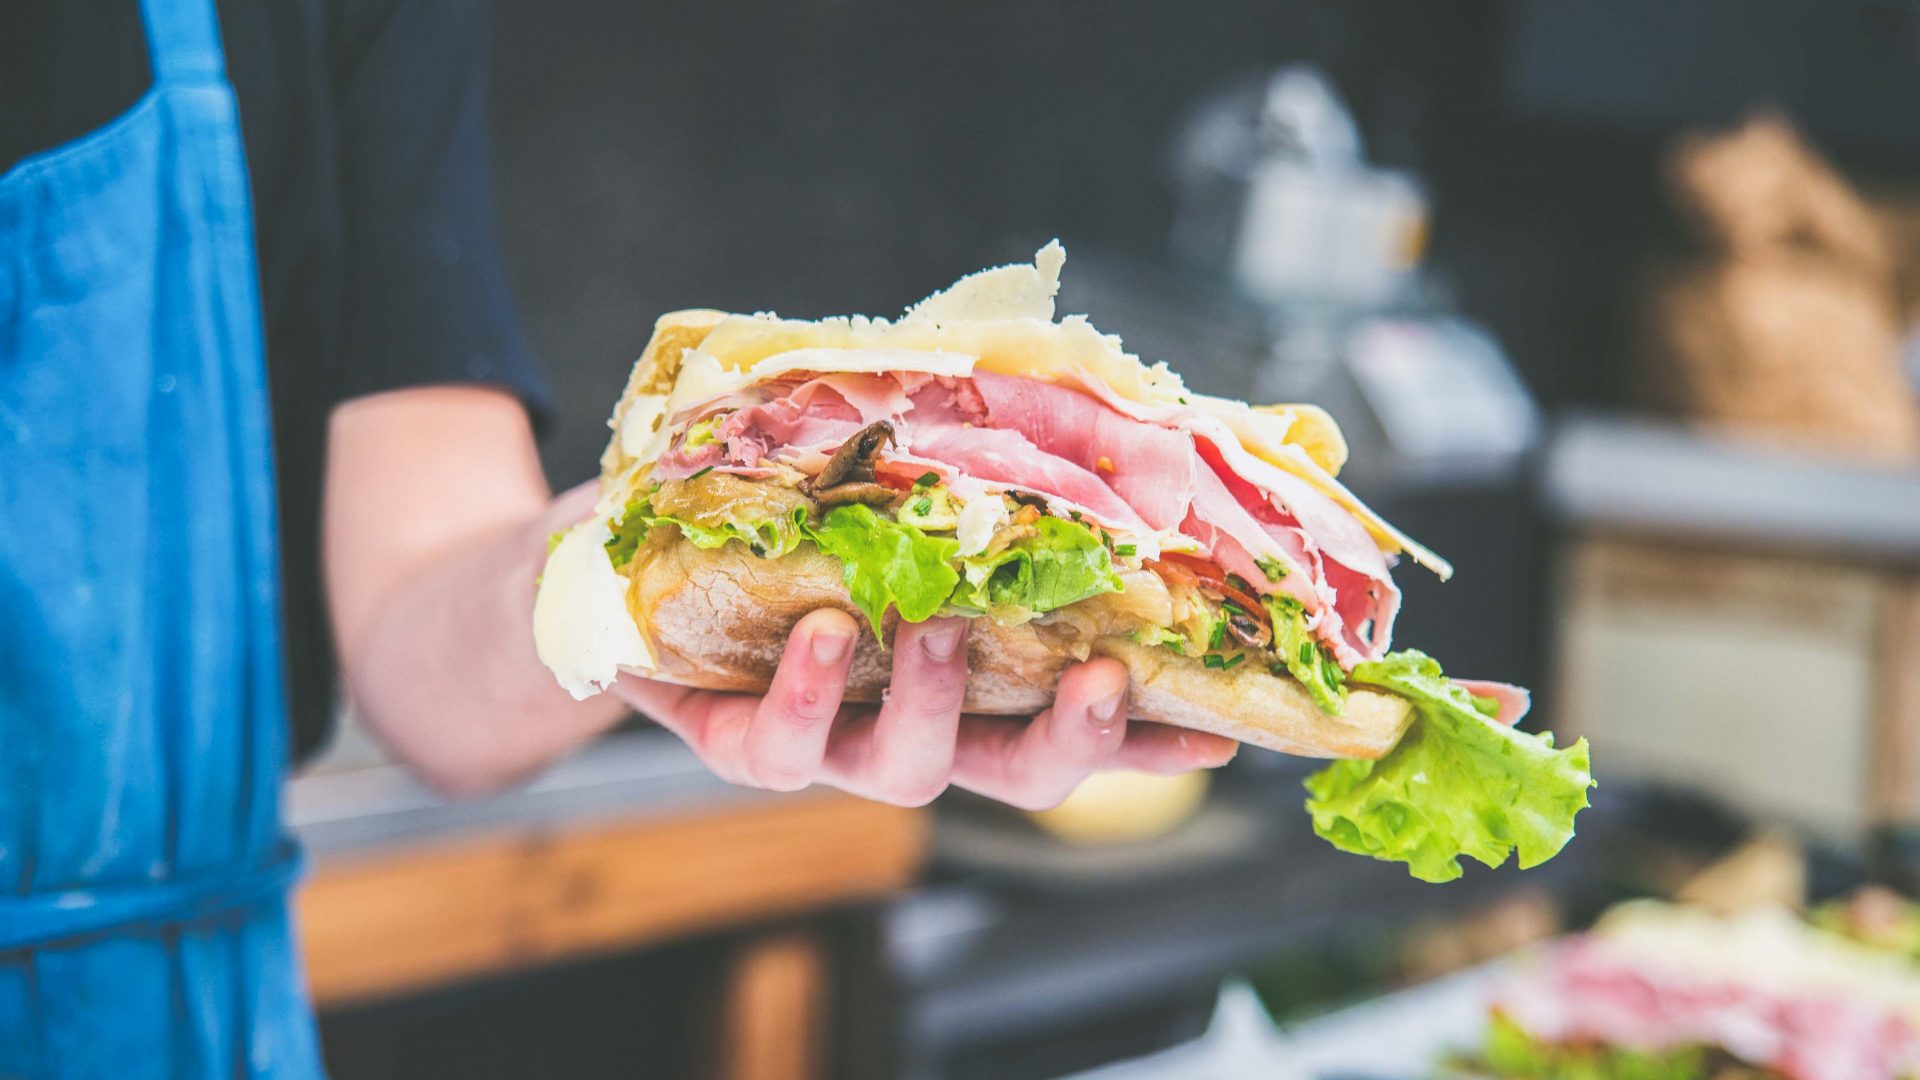 Paris street food: French ham, Cantal cheese, fresh salads and avocados are some of the ingredients in Alain Roussel's now-legendary sandwiches.